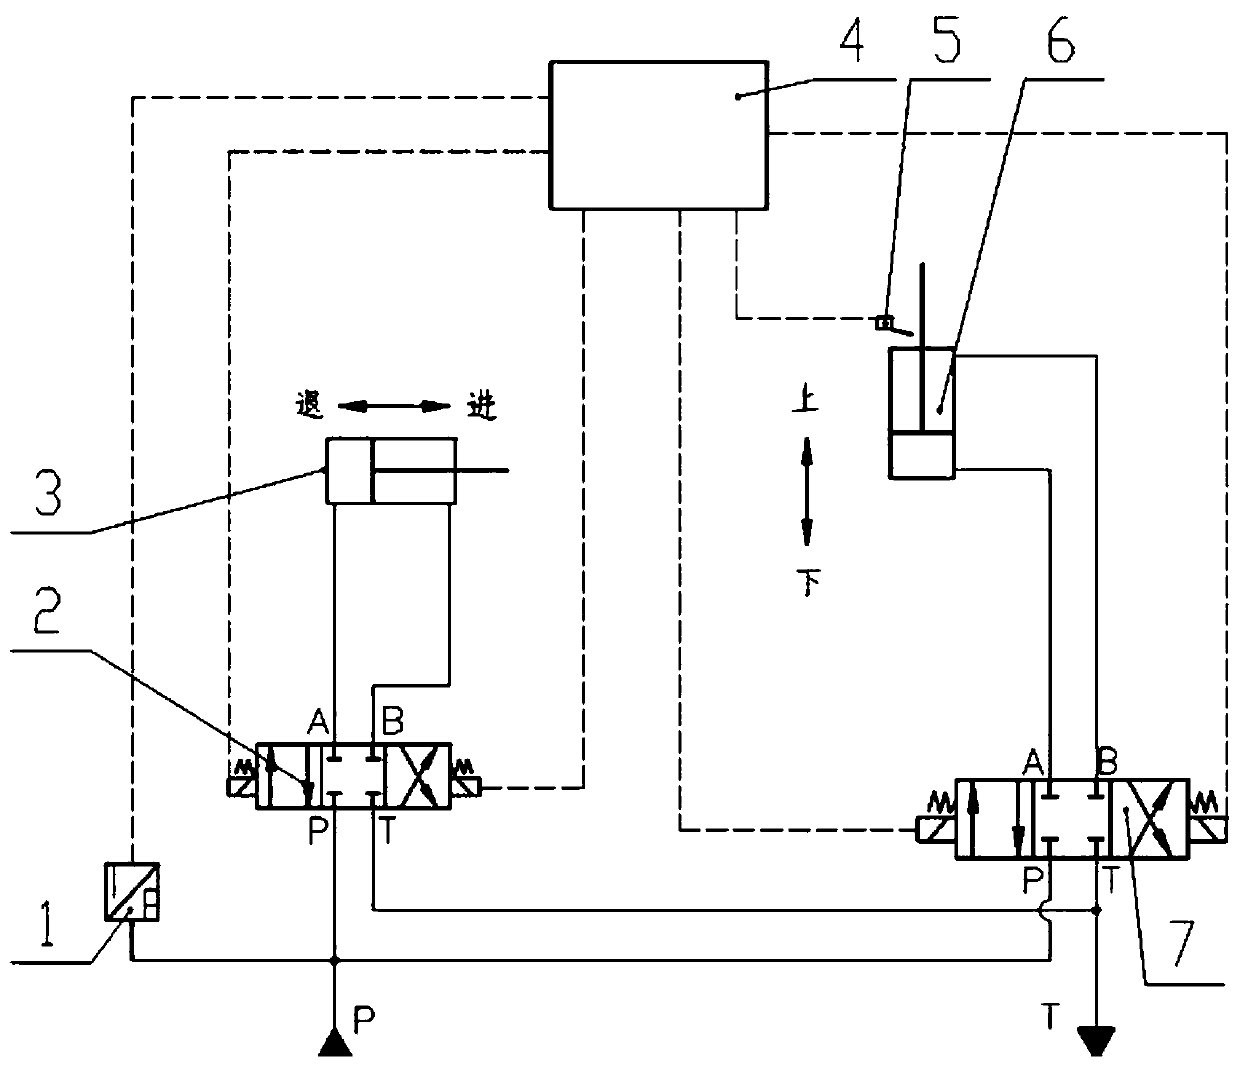 An electro-hydraulic system and method for improving garbage compaction